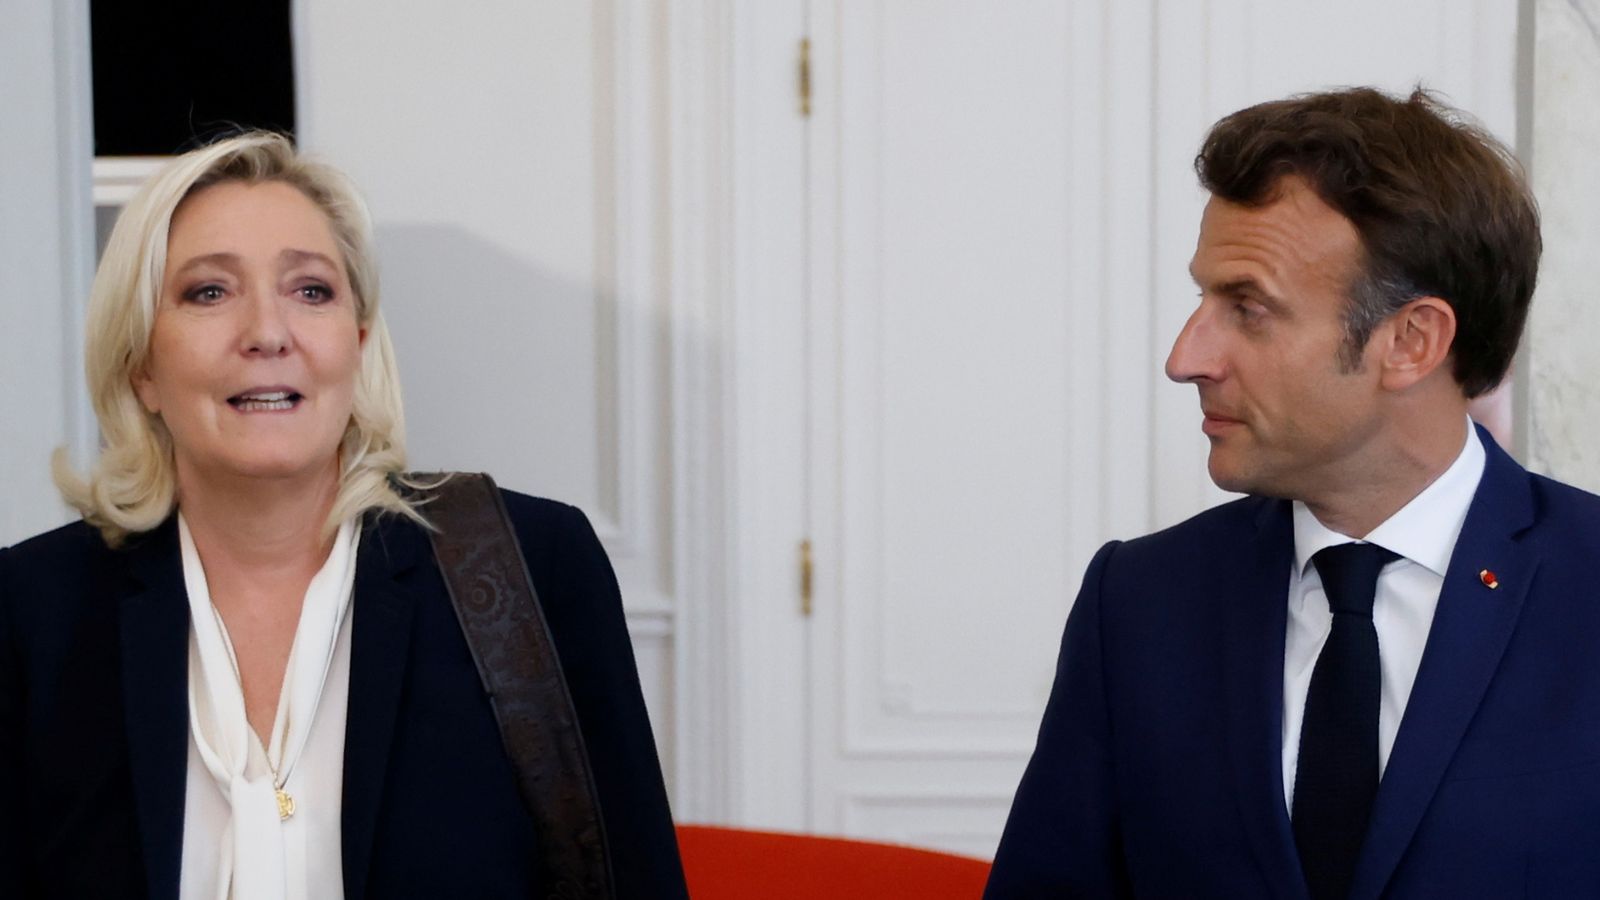 France election: Marine Le Pen on the brink of power, as Emmanuel Macron’s big gamble looks set to fail